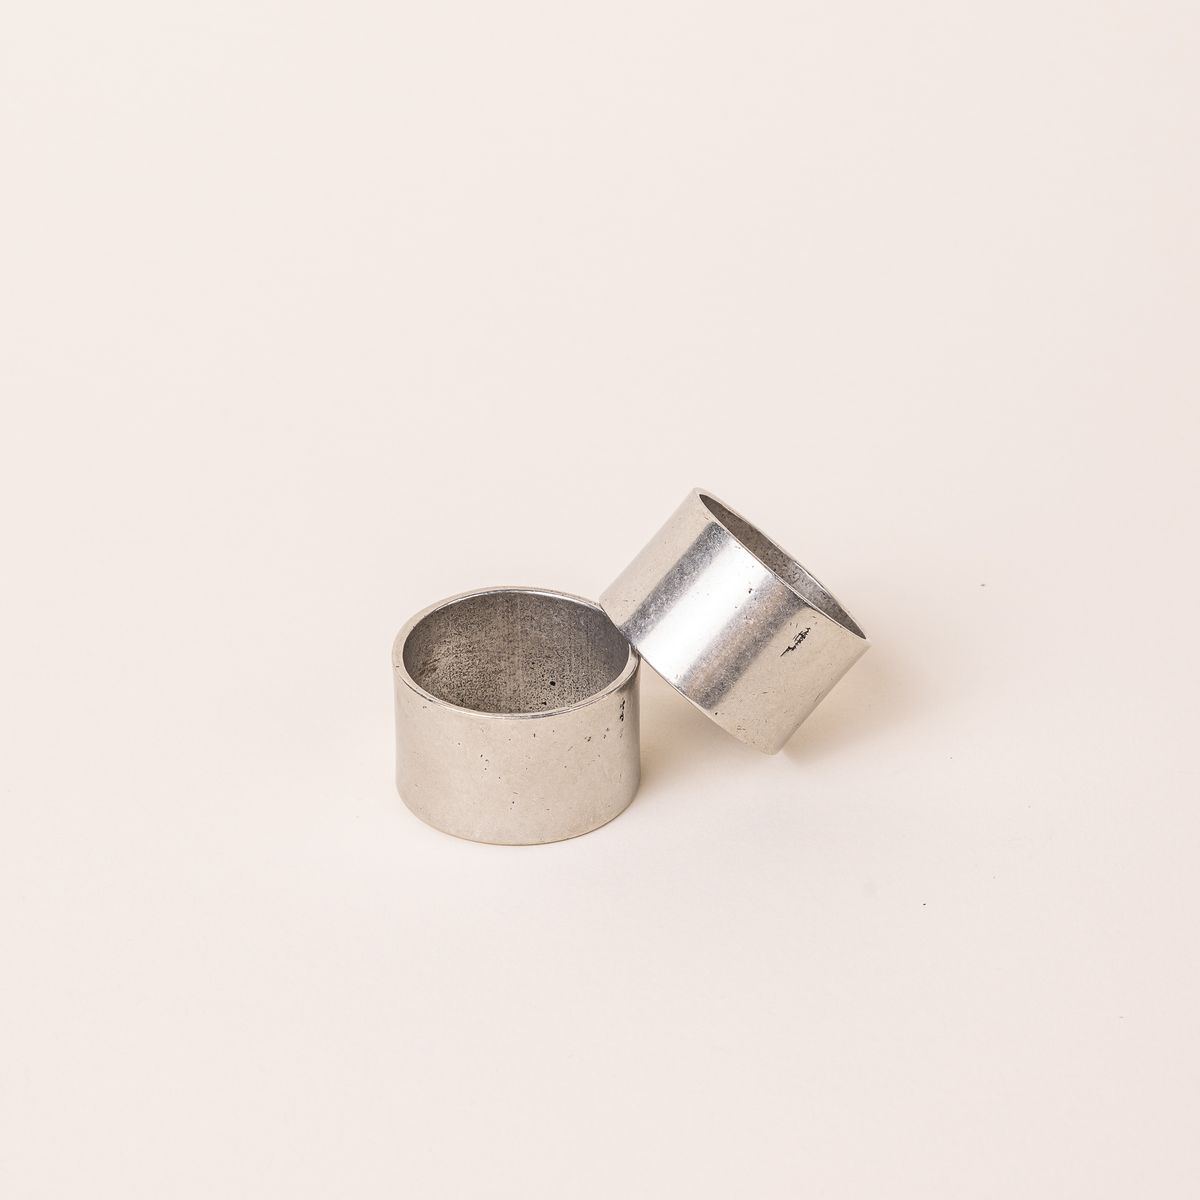 Two simple silver pewter napkin rings - one is leaning on the other.